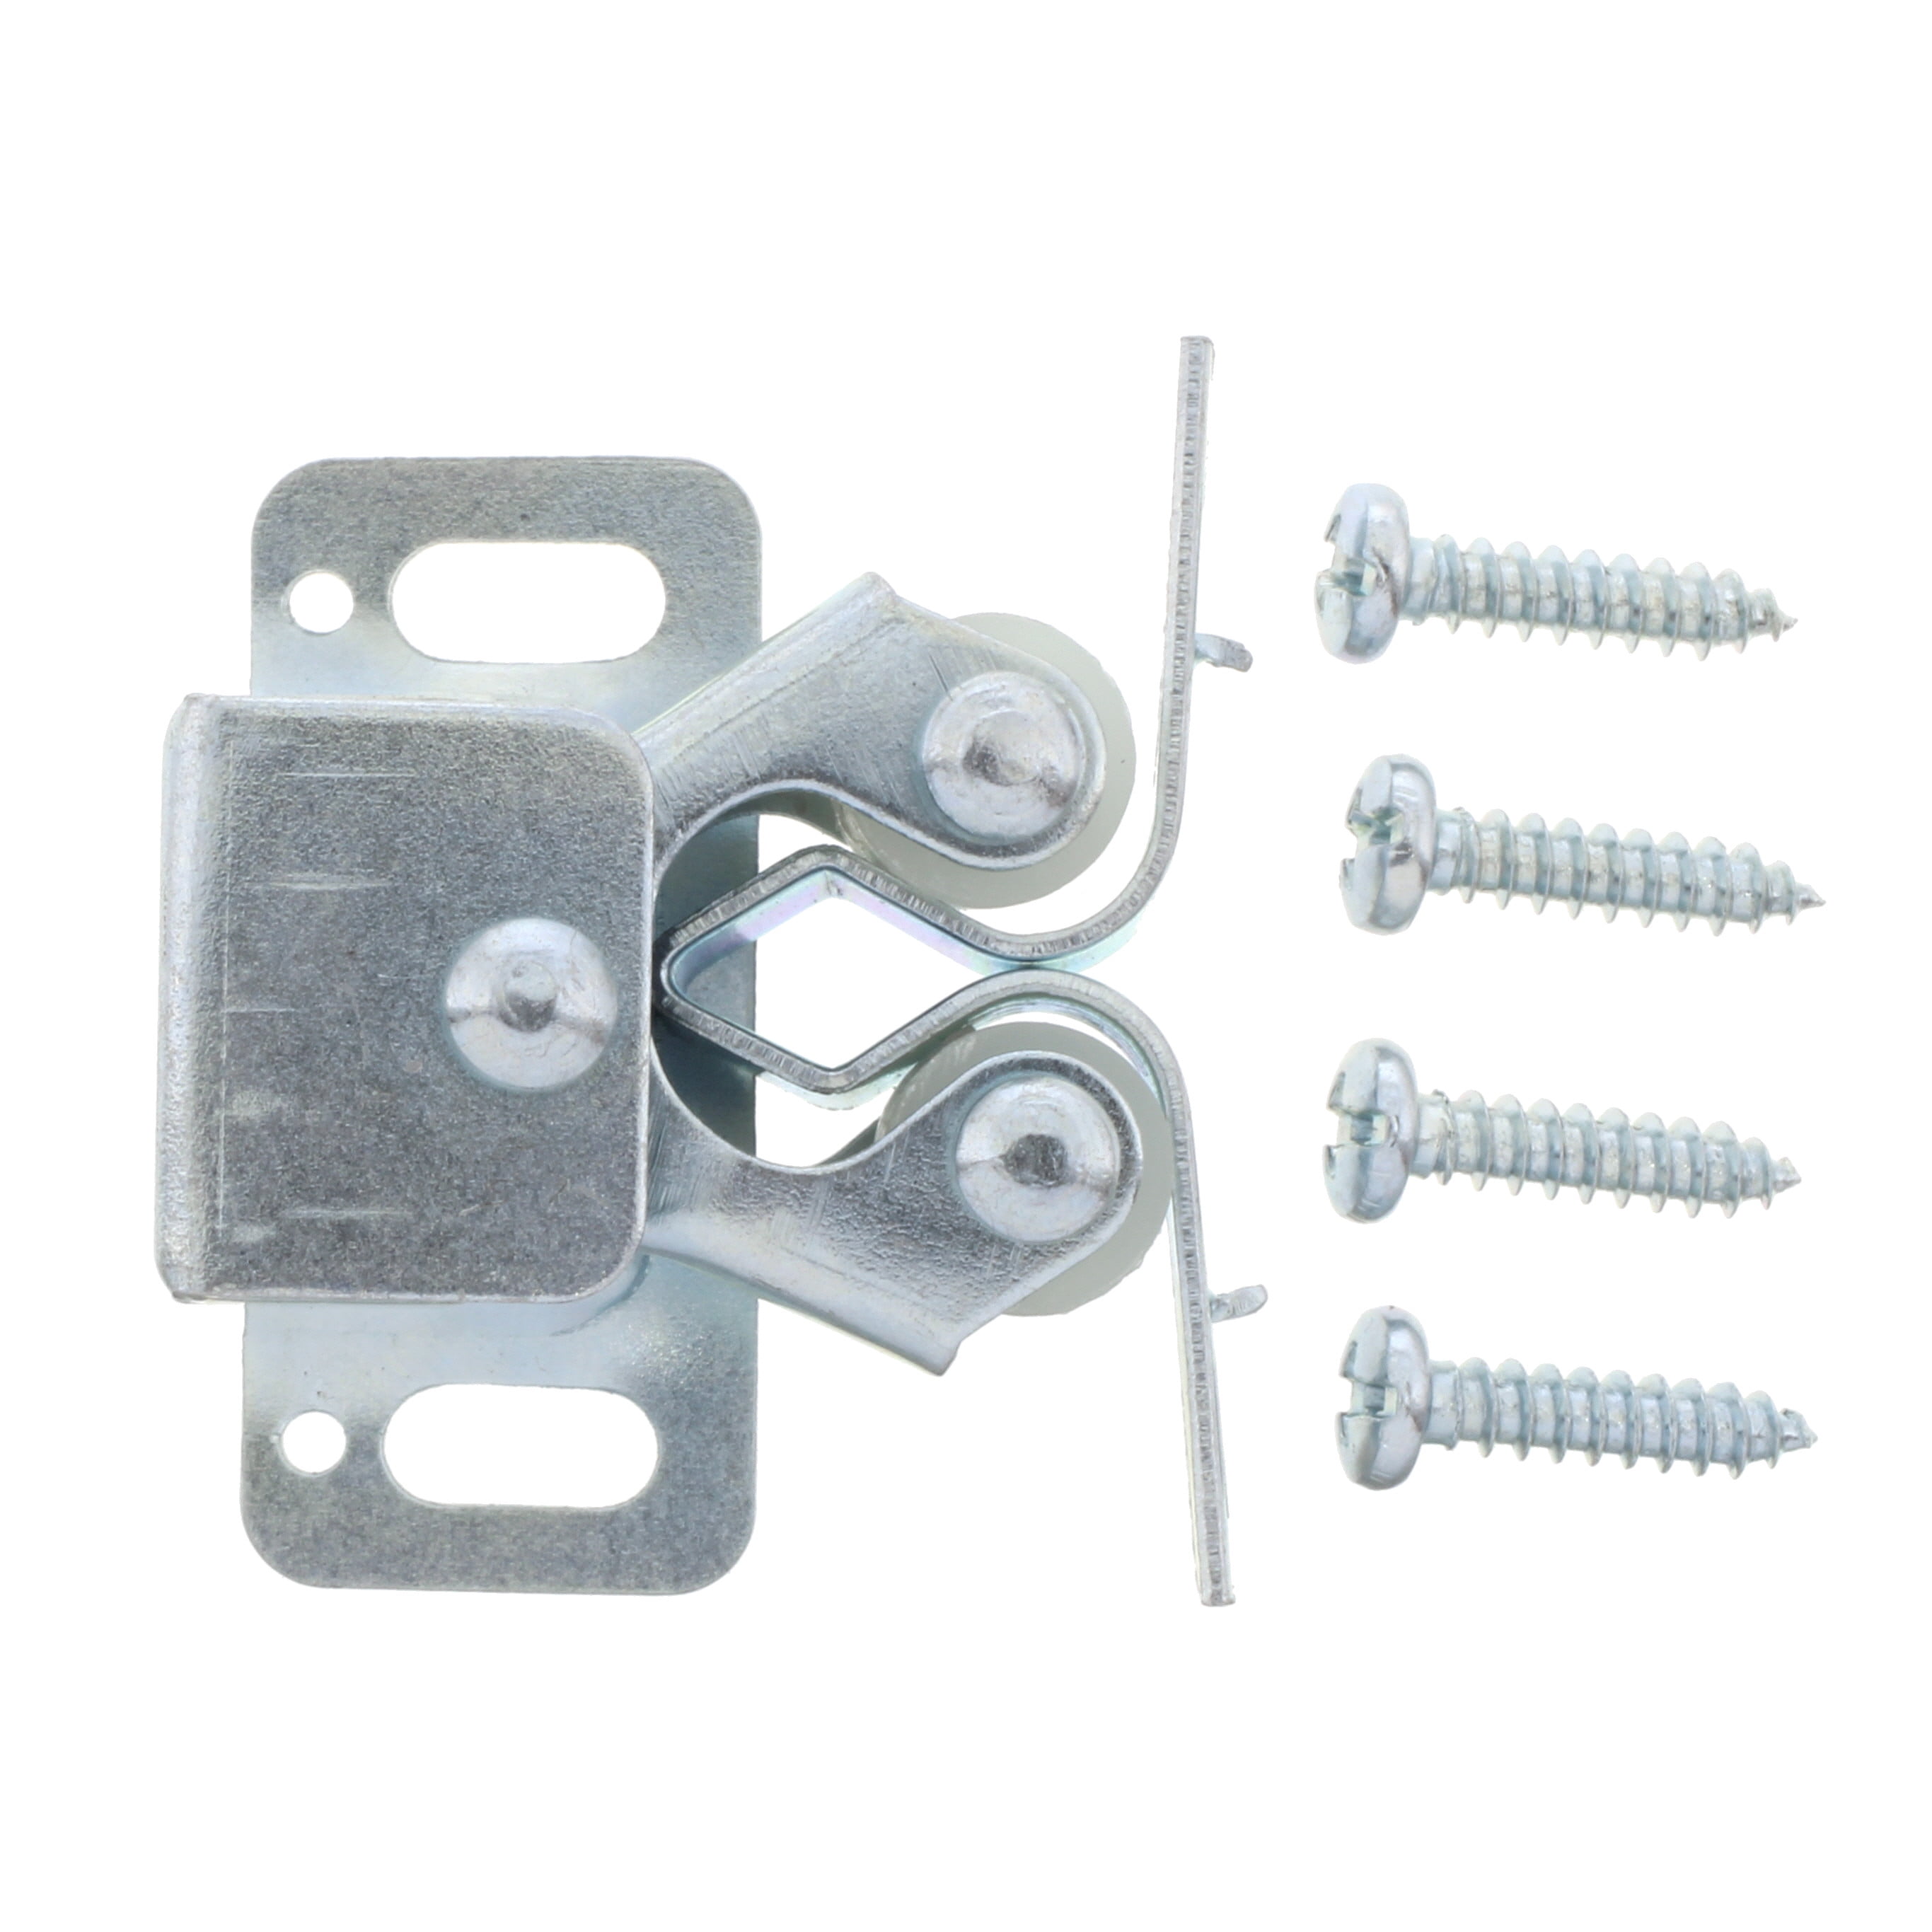 Roller Catches fixing screws included Choice of White or Brown 